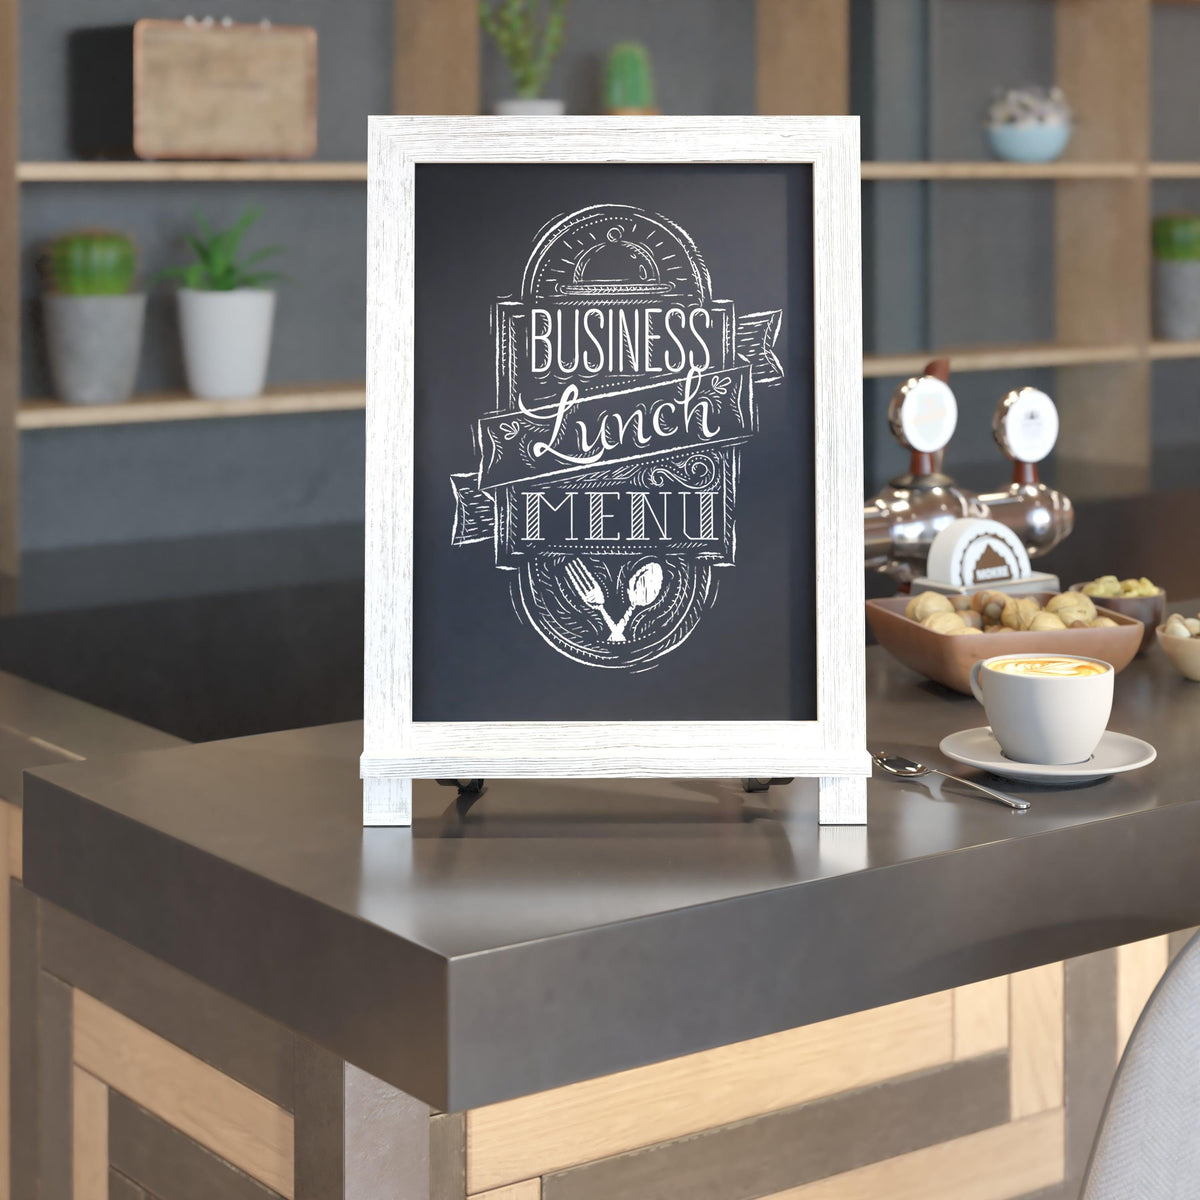 White Wash,12inchW x 1.88inchD x 17inchH |#| 10 Pack 12inch x 17inch Tabletop or Wall Mount Magnetic Chalkboards - Whitewashed